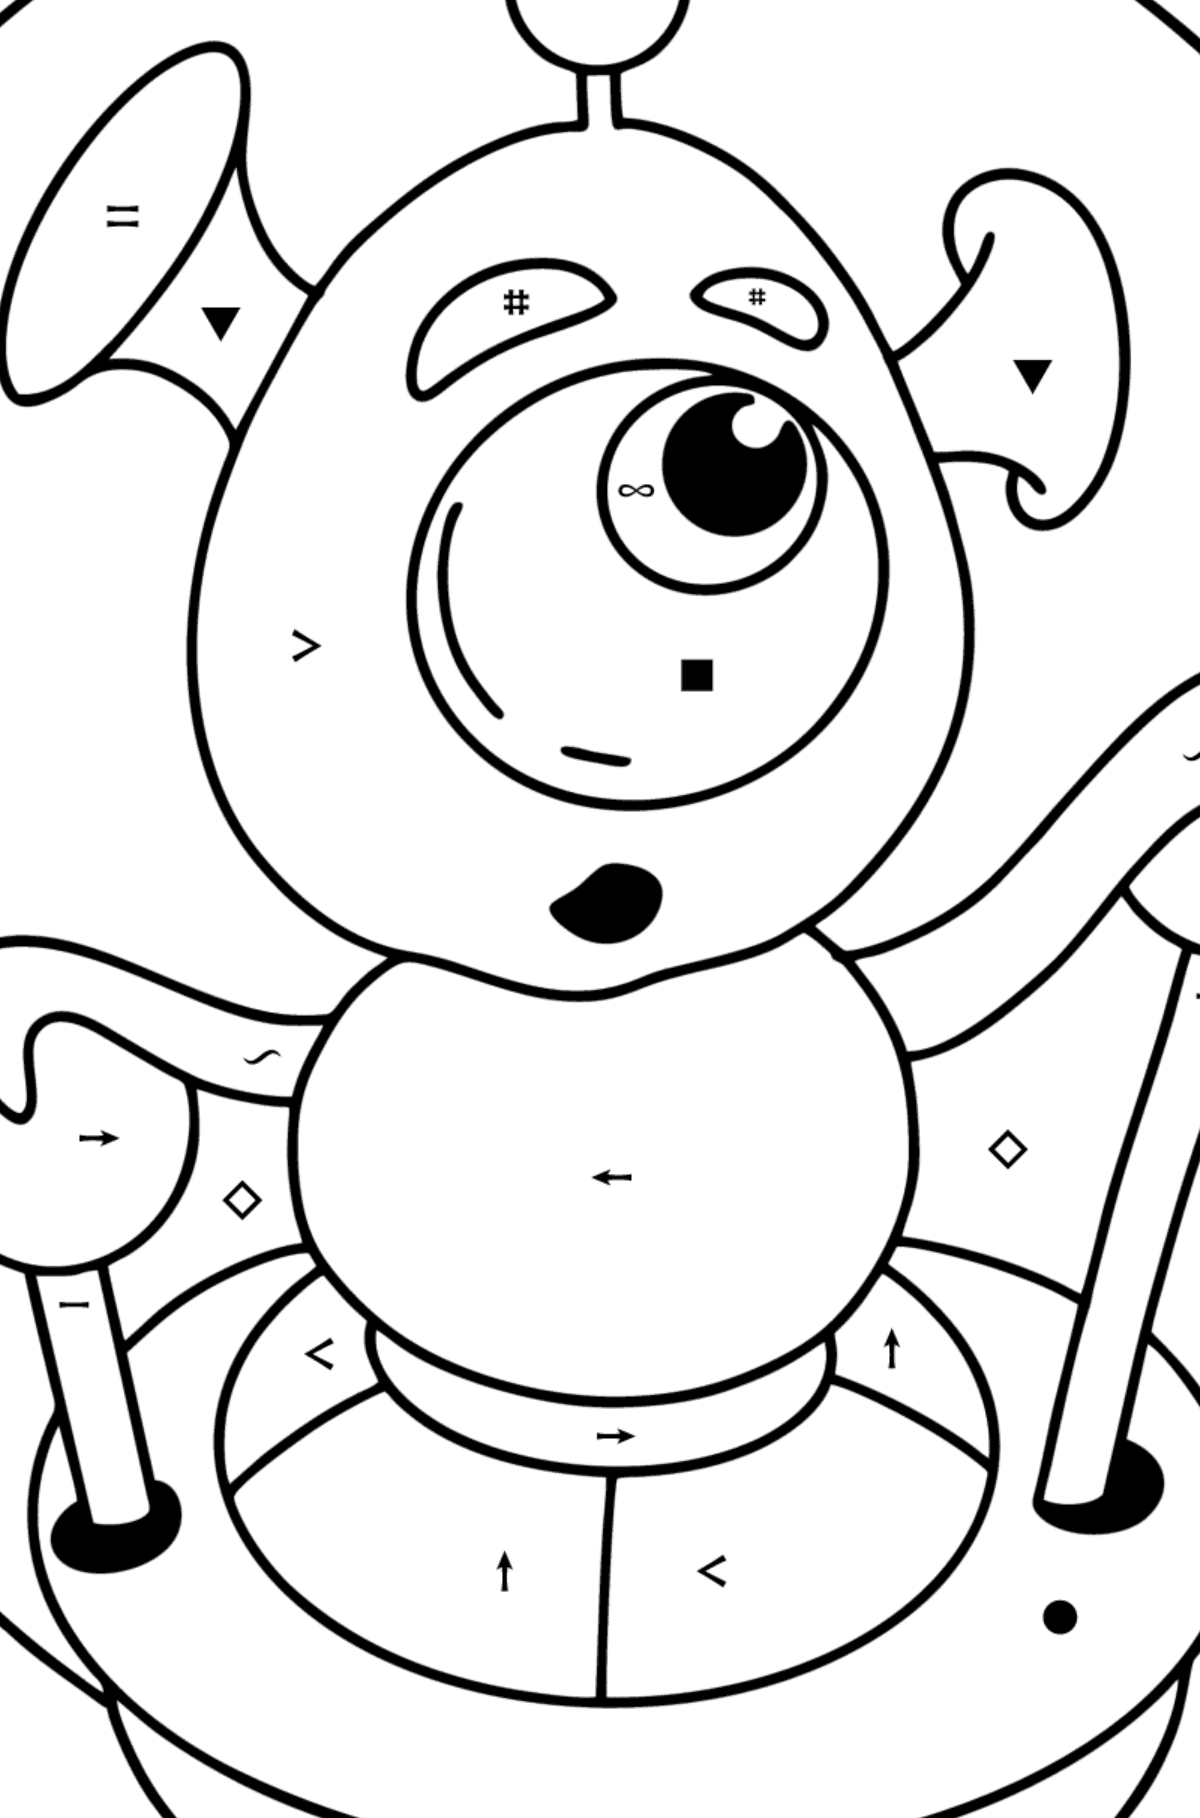 Baby Alien coloring pages - Coloring by Symbols for Kids